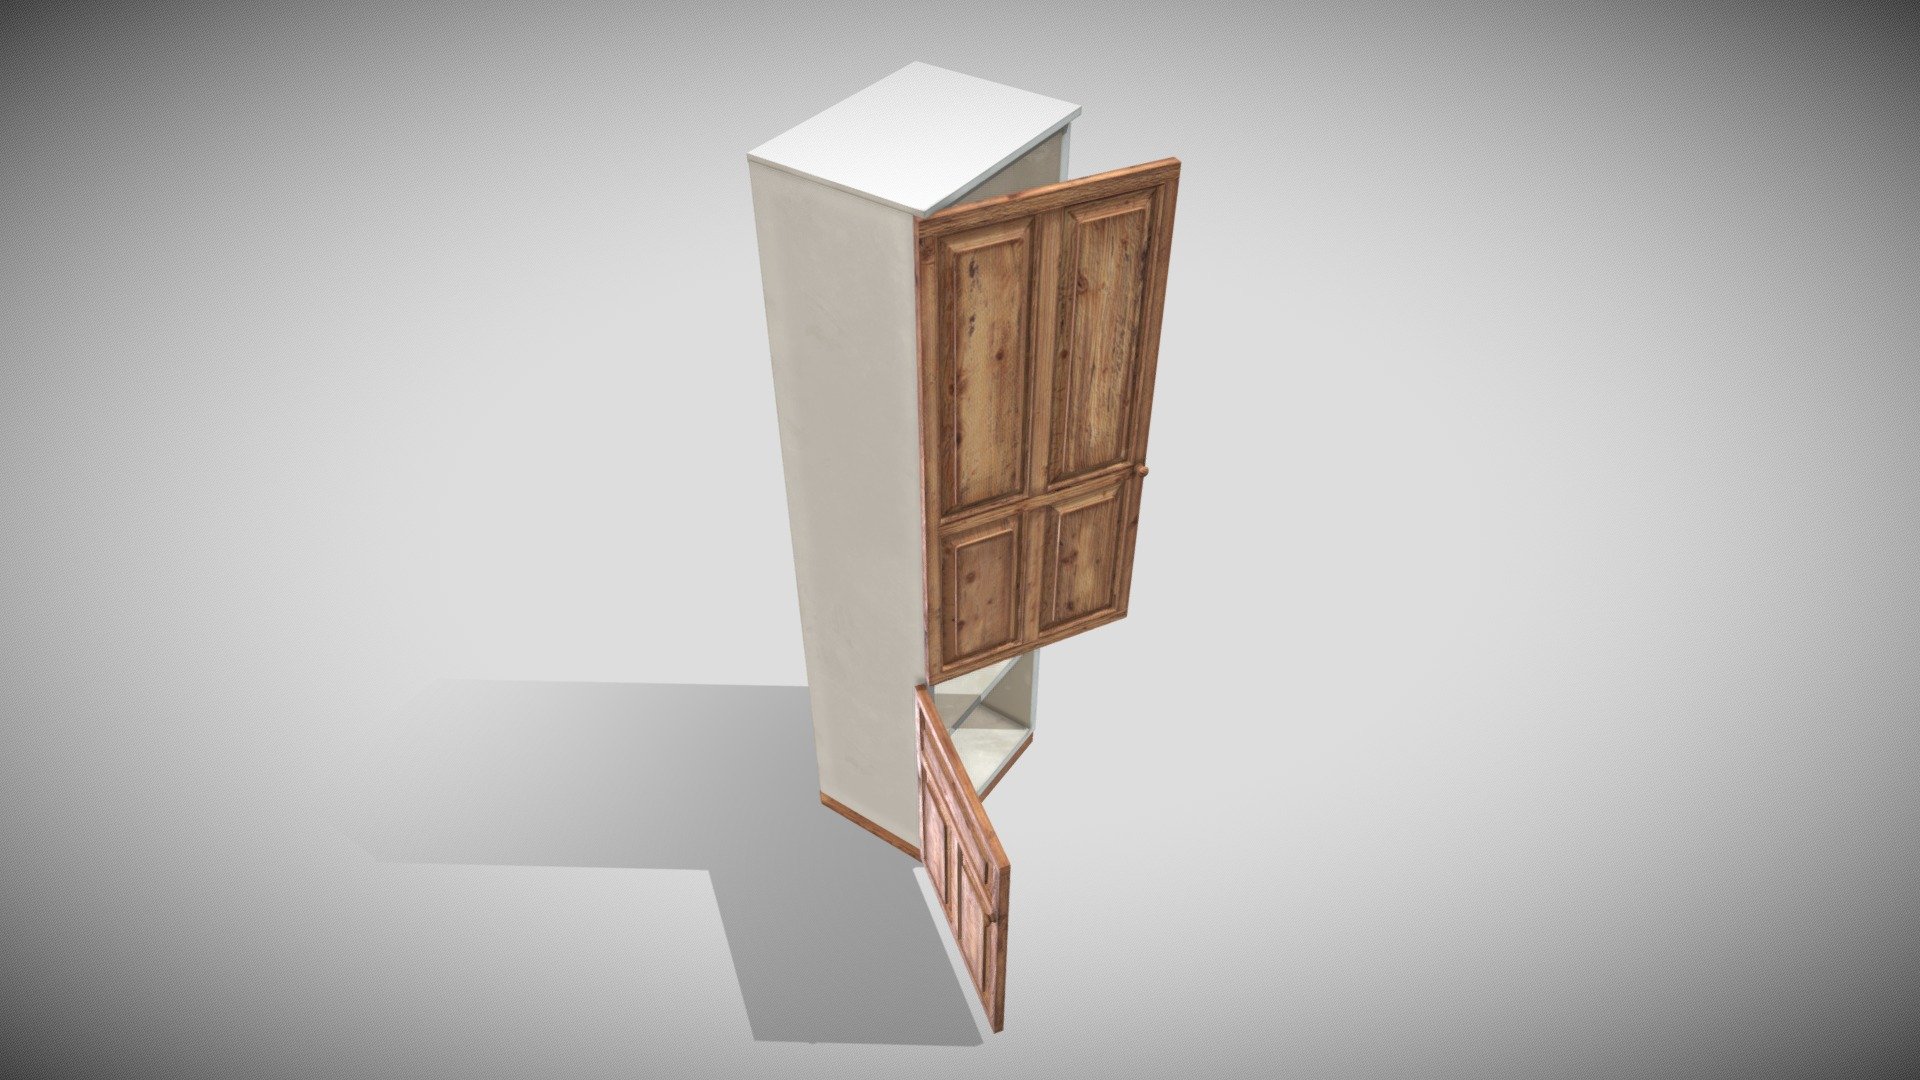 One Material PBR 4k Metalness

Pivot at Zero Bottom

Size OK

Door are separate objects with Pivot in right place and can be animated

Complete Compilatio https://skfb.ly/ovXFn - Kitchen Modules - Mod G - Buy Royalty Free 3D model by Francesco Coldesina (@topfrank2013) 3d model